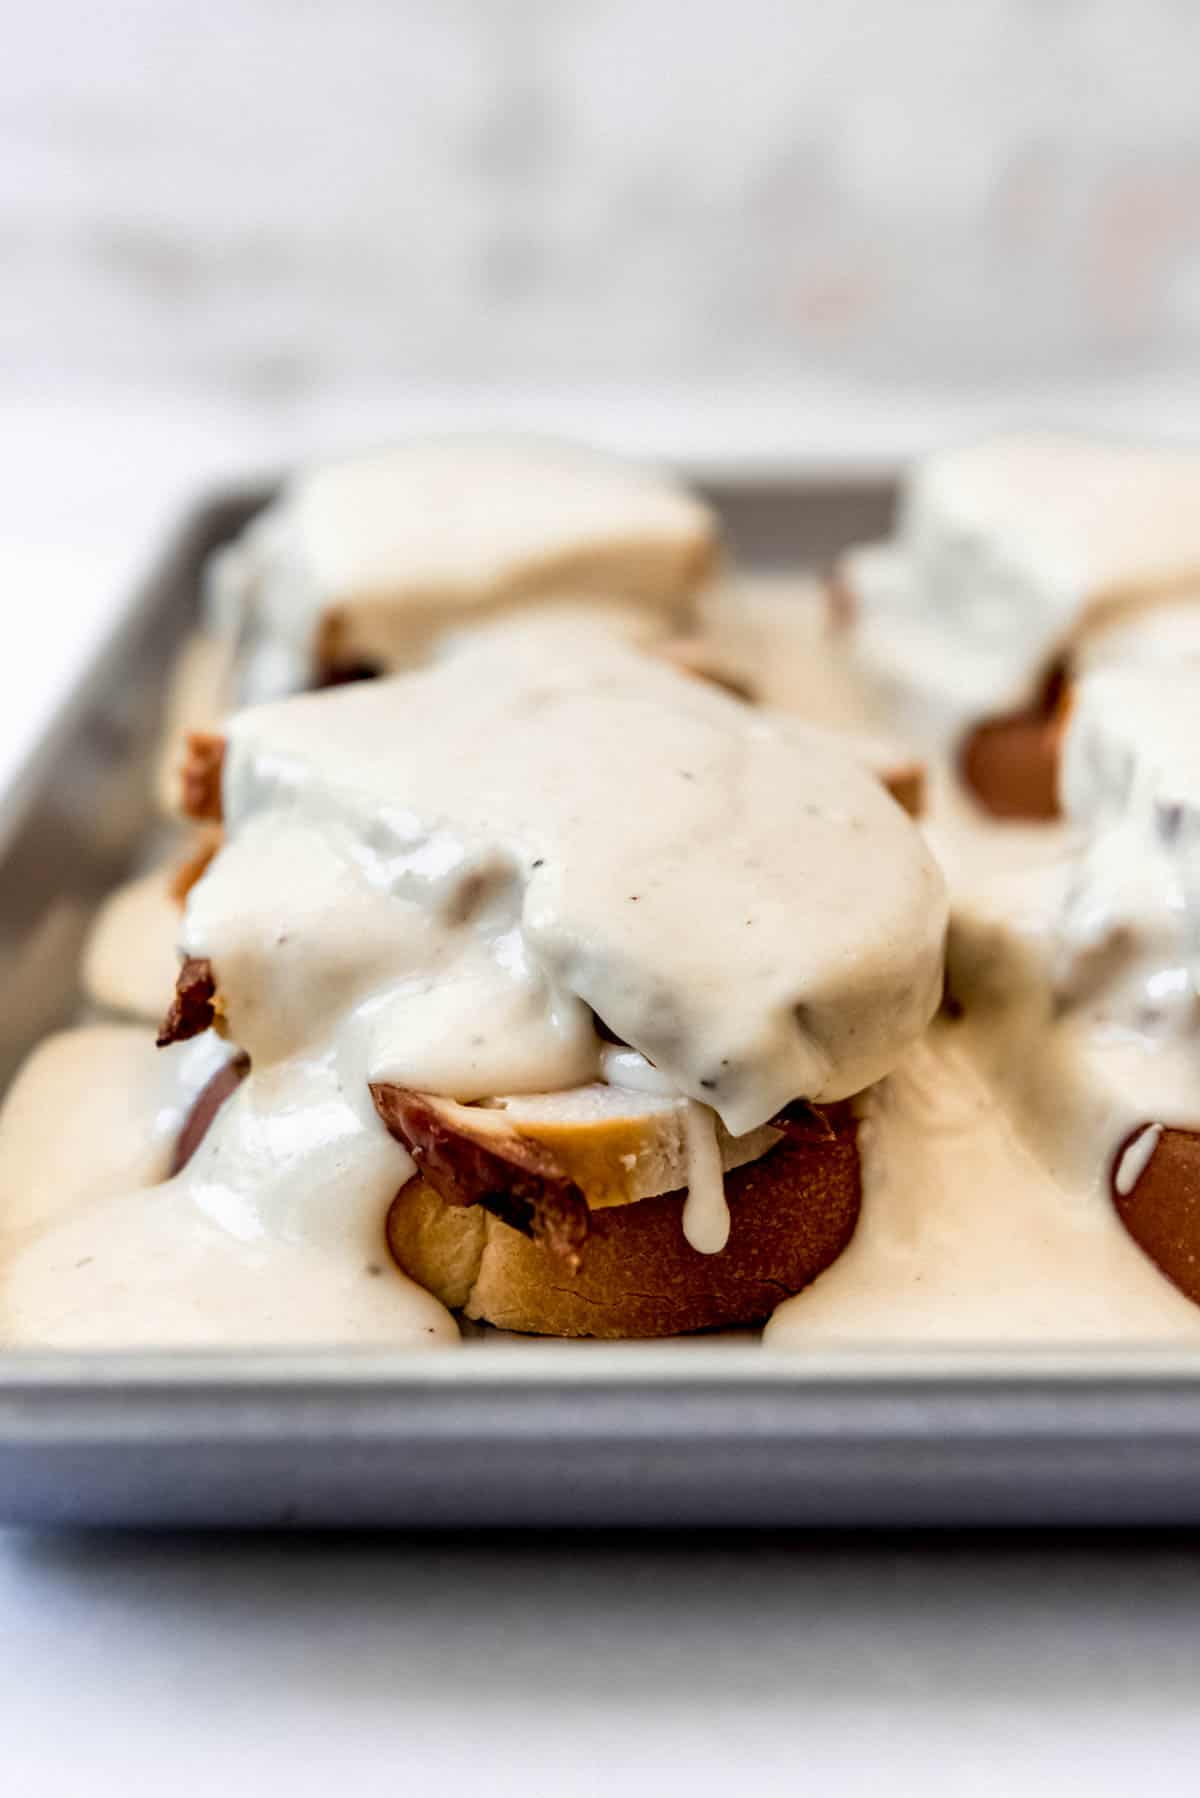 Mornay smothered over open faced sandwiches on a baking sheet.